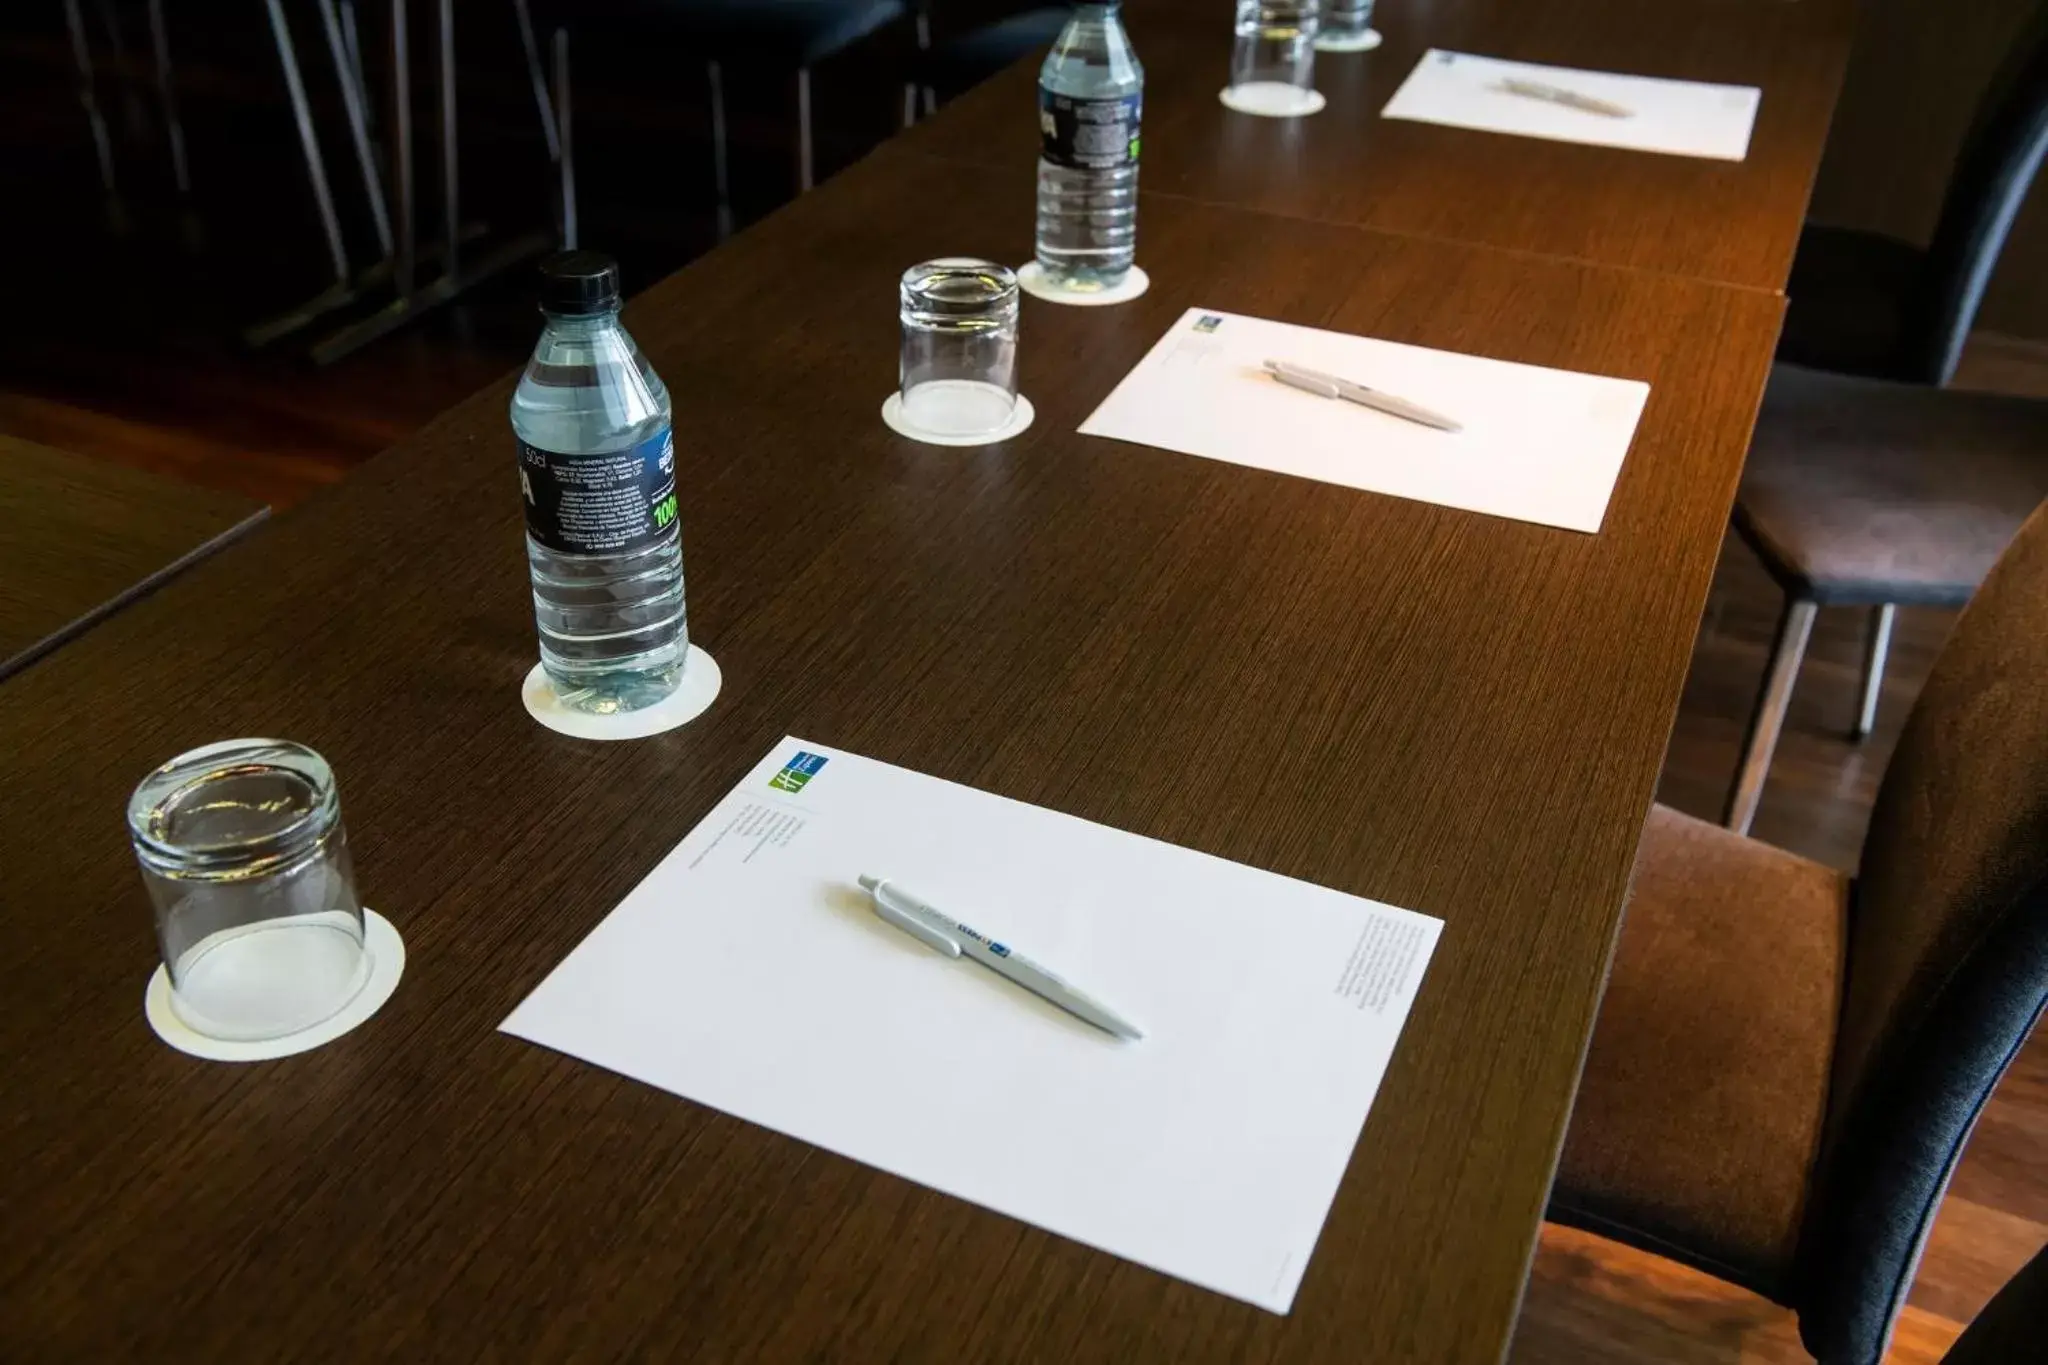 Meeting/conference room in Holiday Inn Express Barcelona City 22@, an IHG Hotel